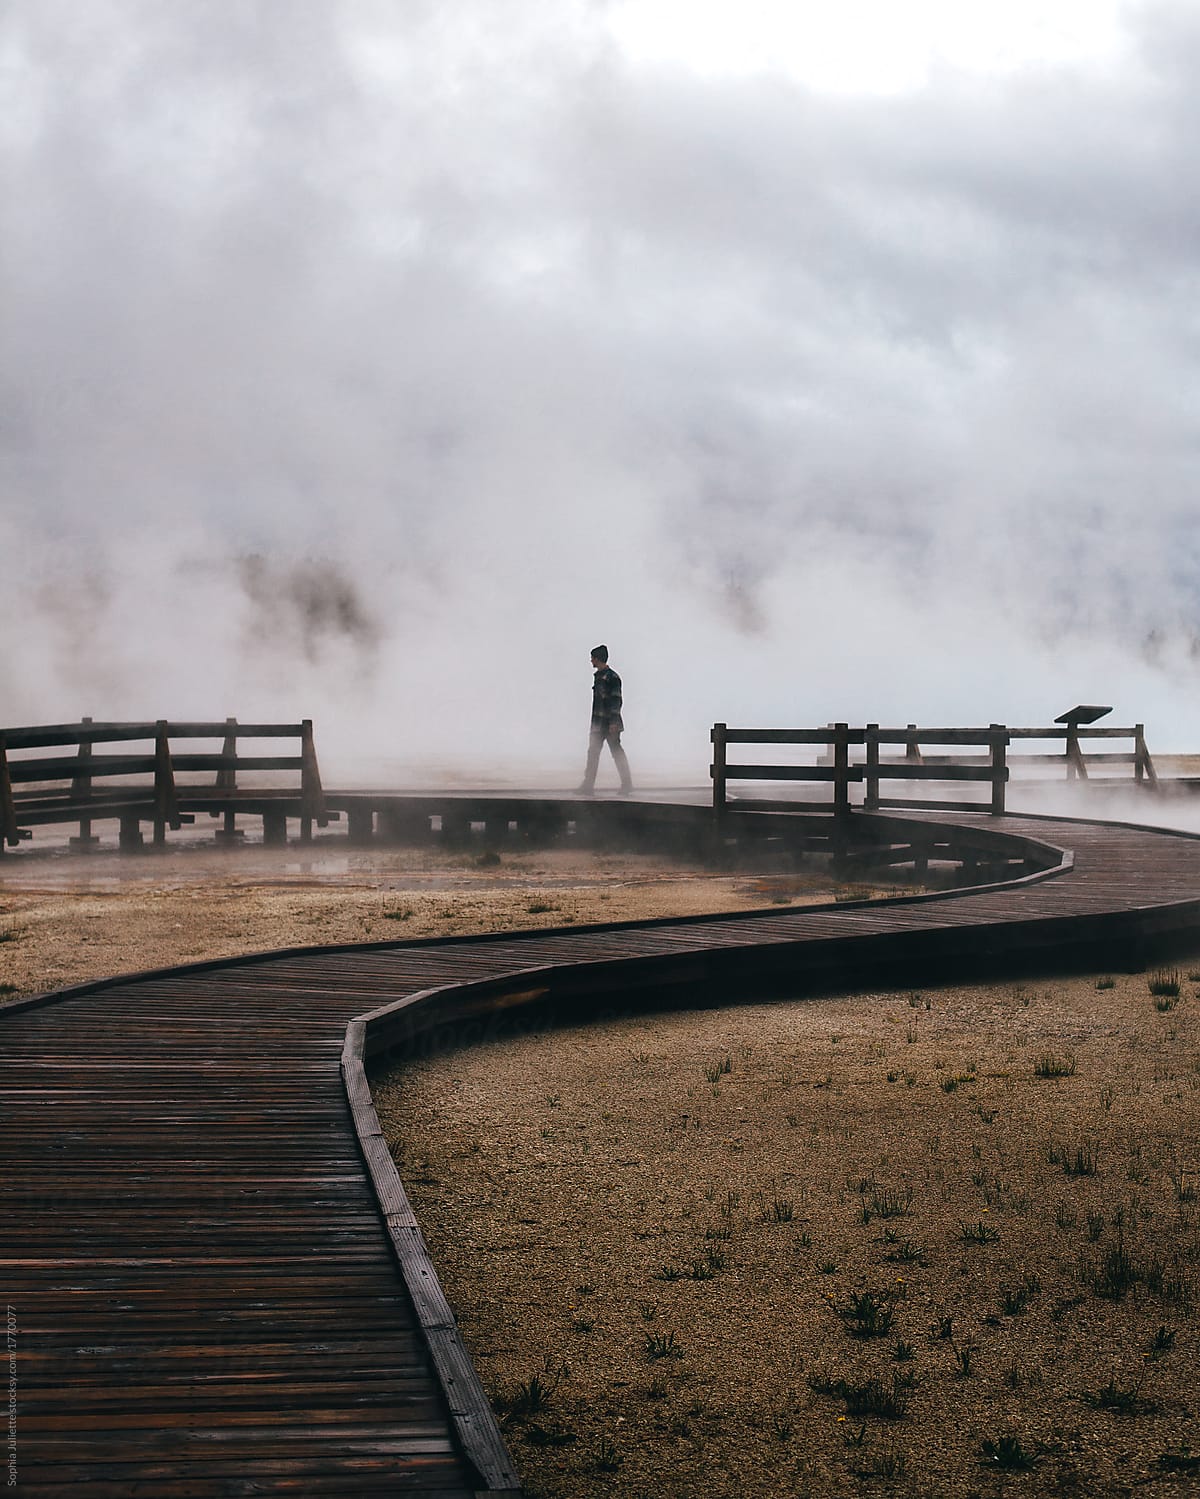 Shadow Of A Person Walking On A Wooden Dock As A Thick Fog